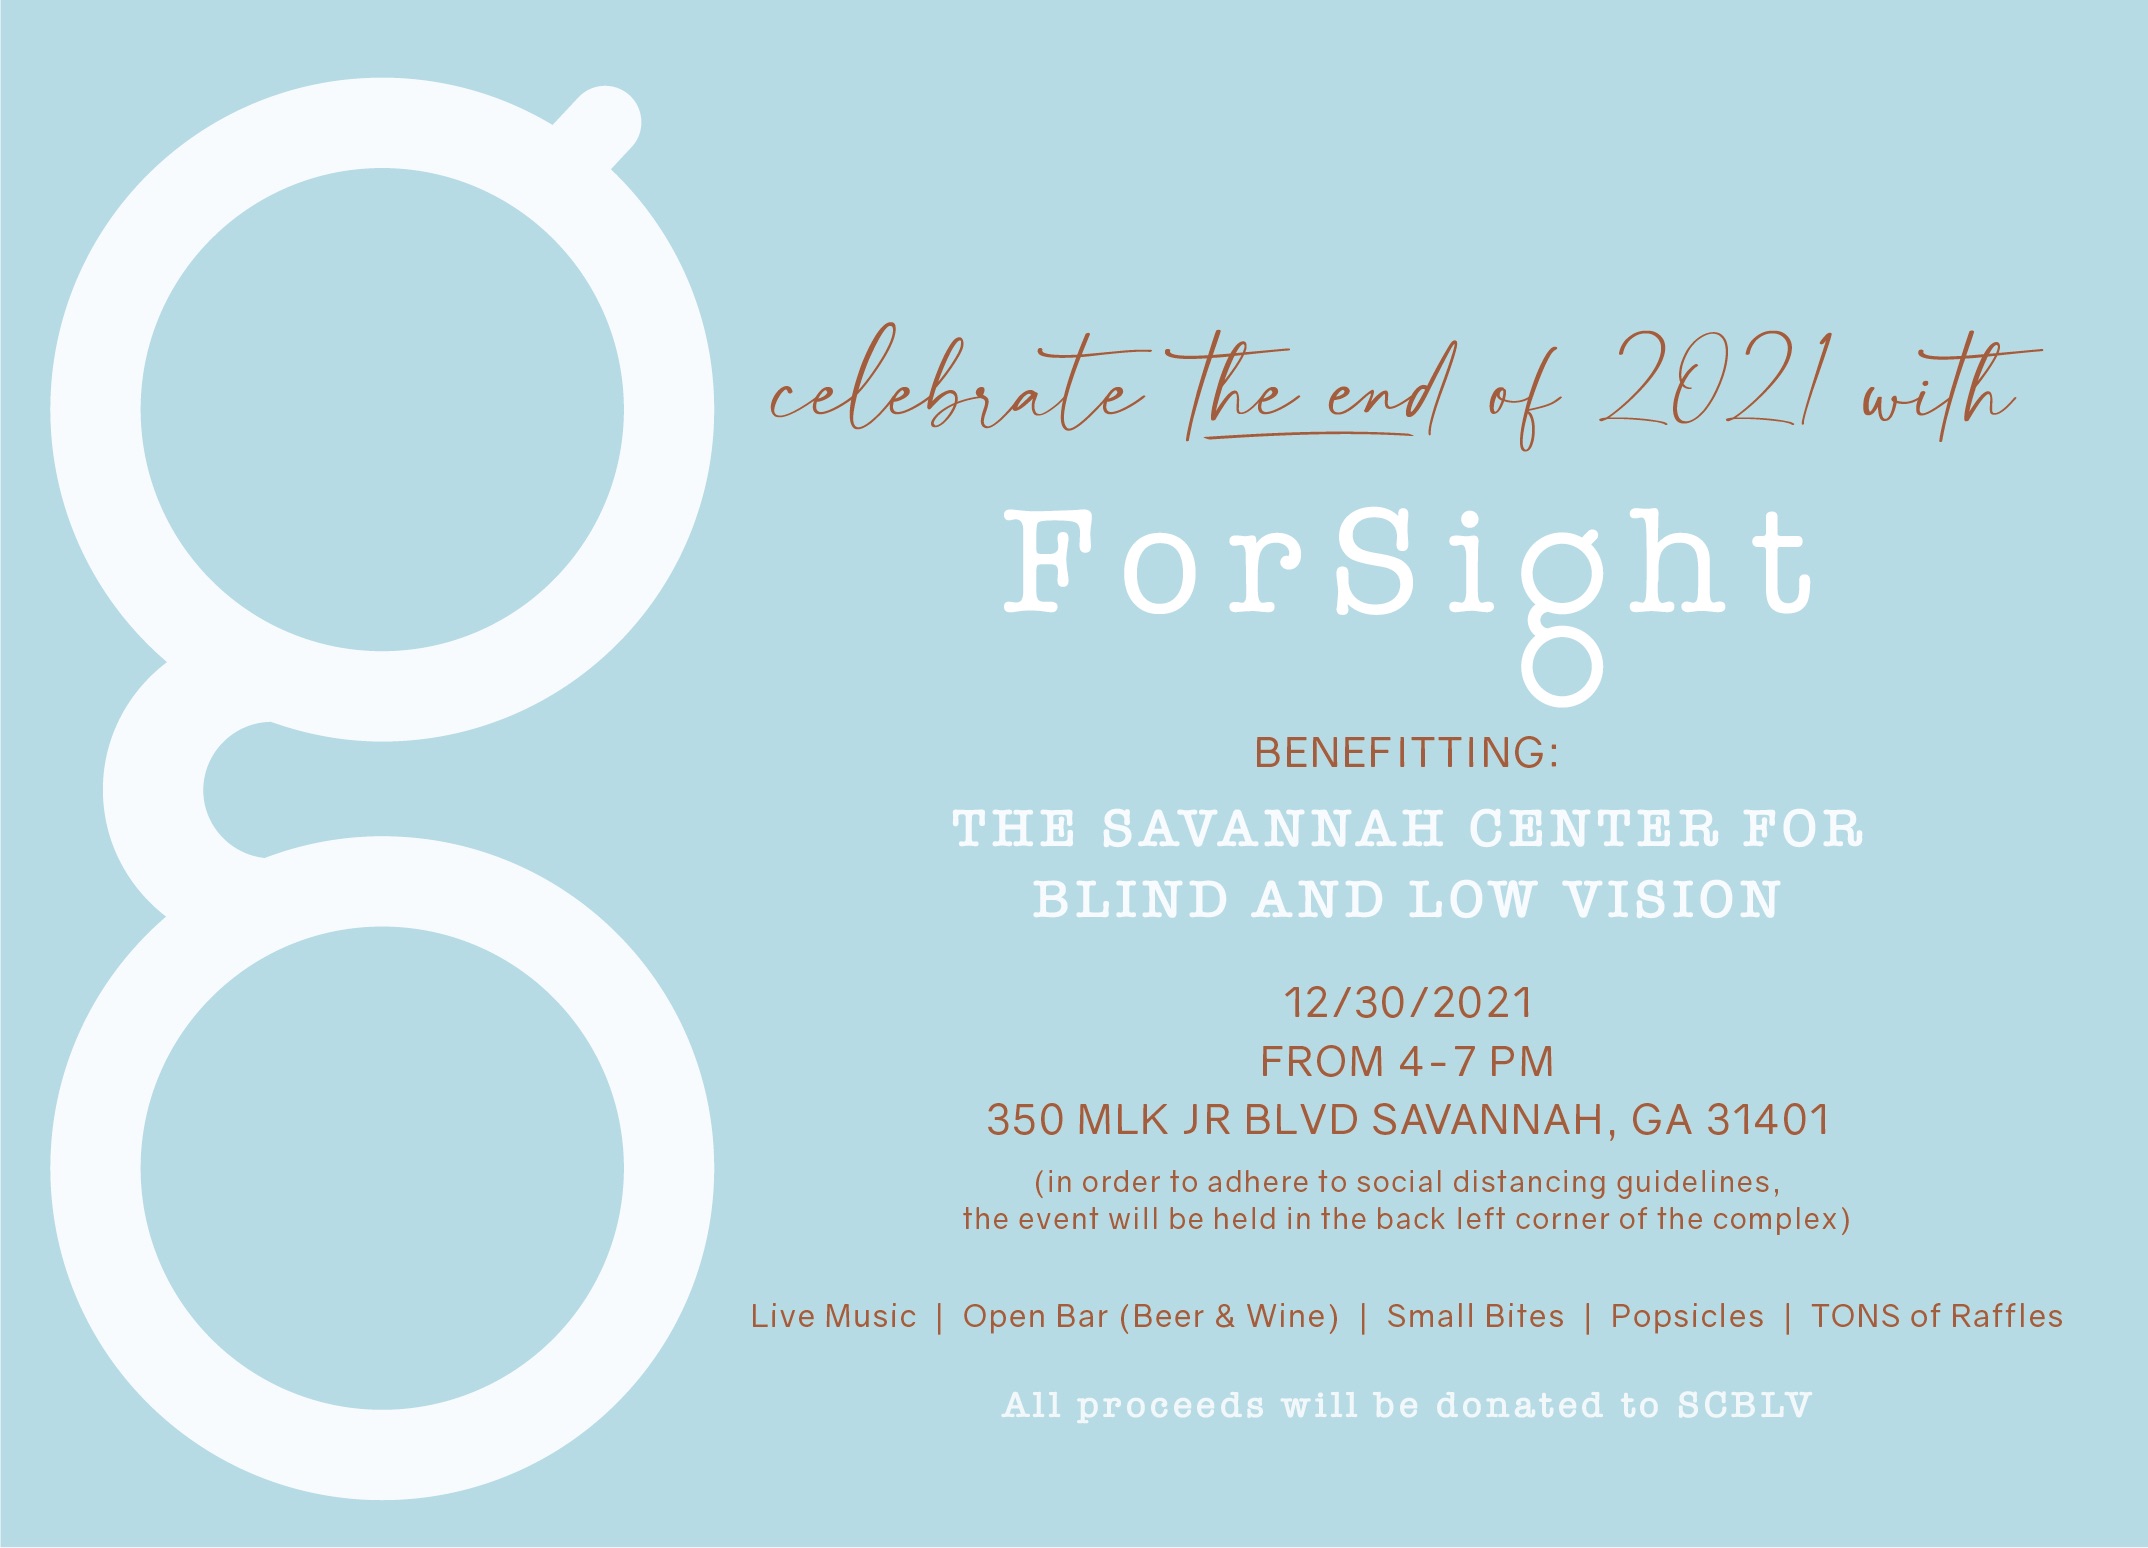 ForSight 2021 Fundraiser Savannah Center for Blind and Low Vision